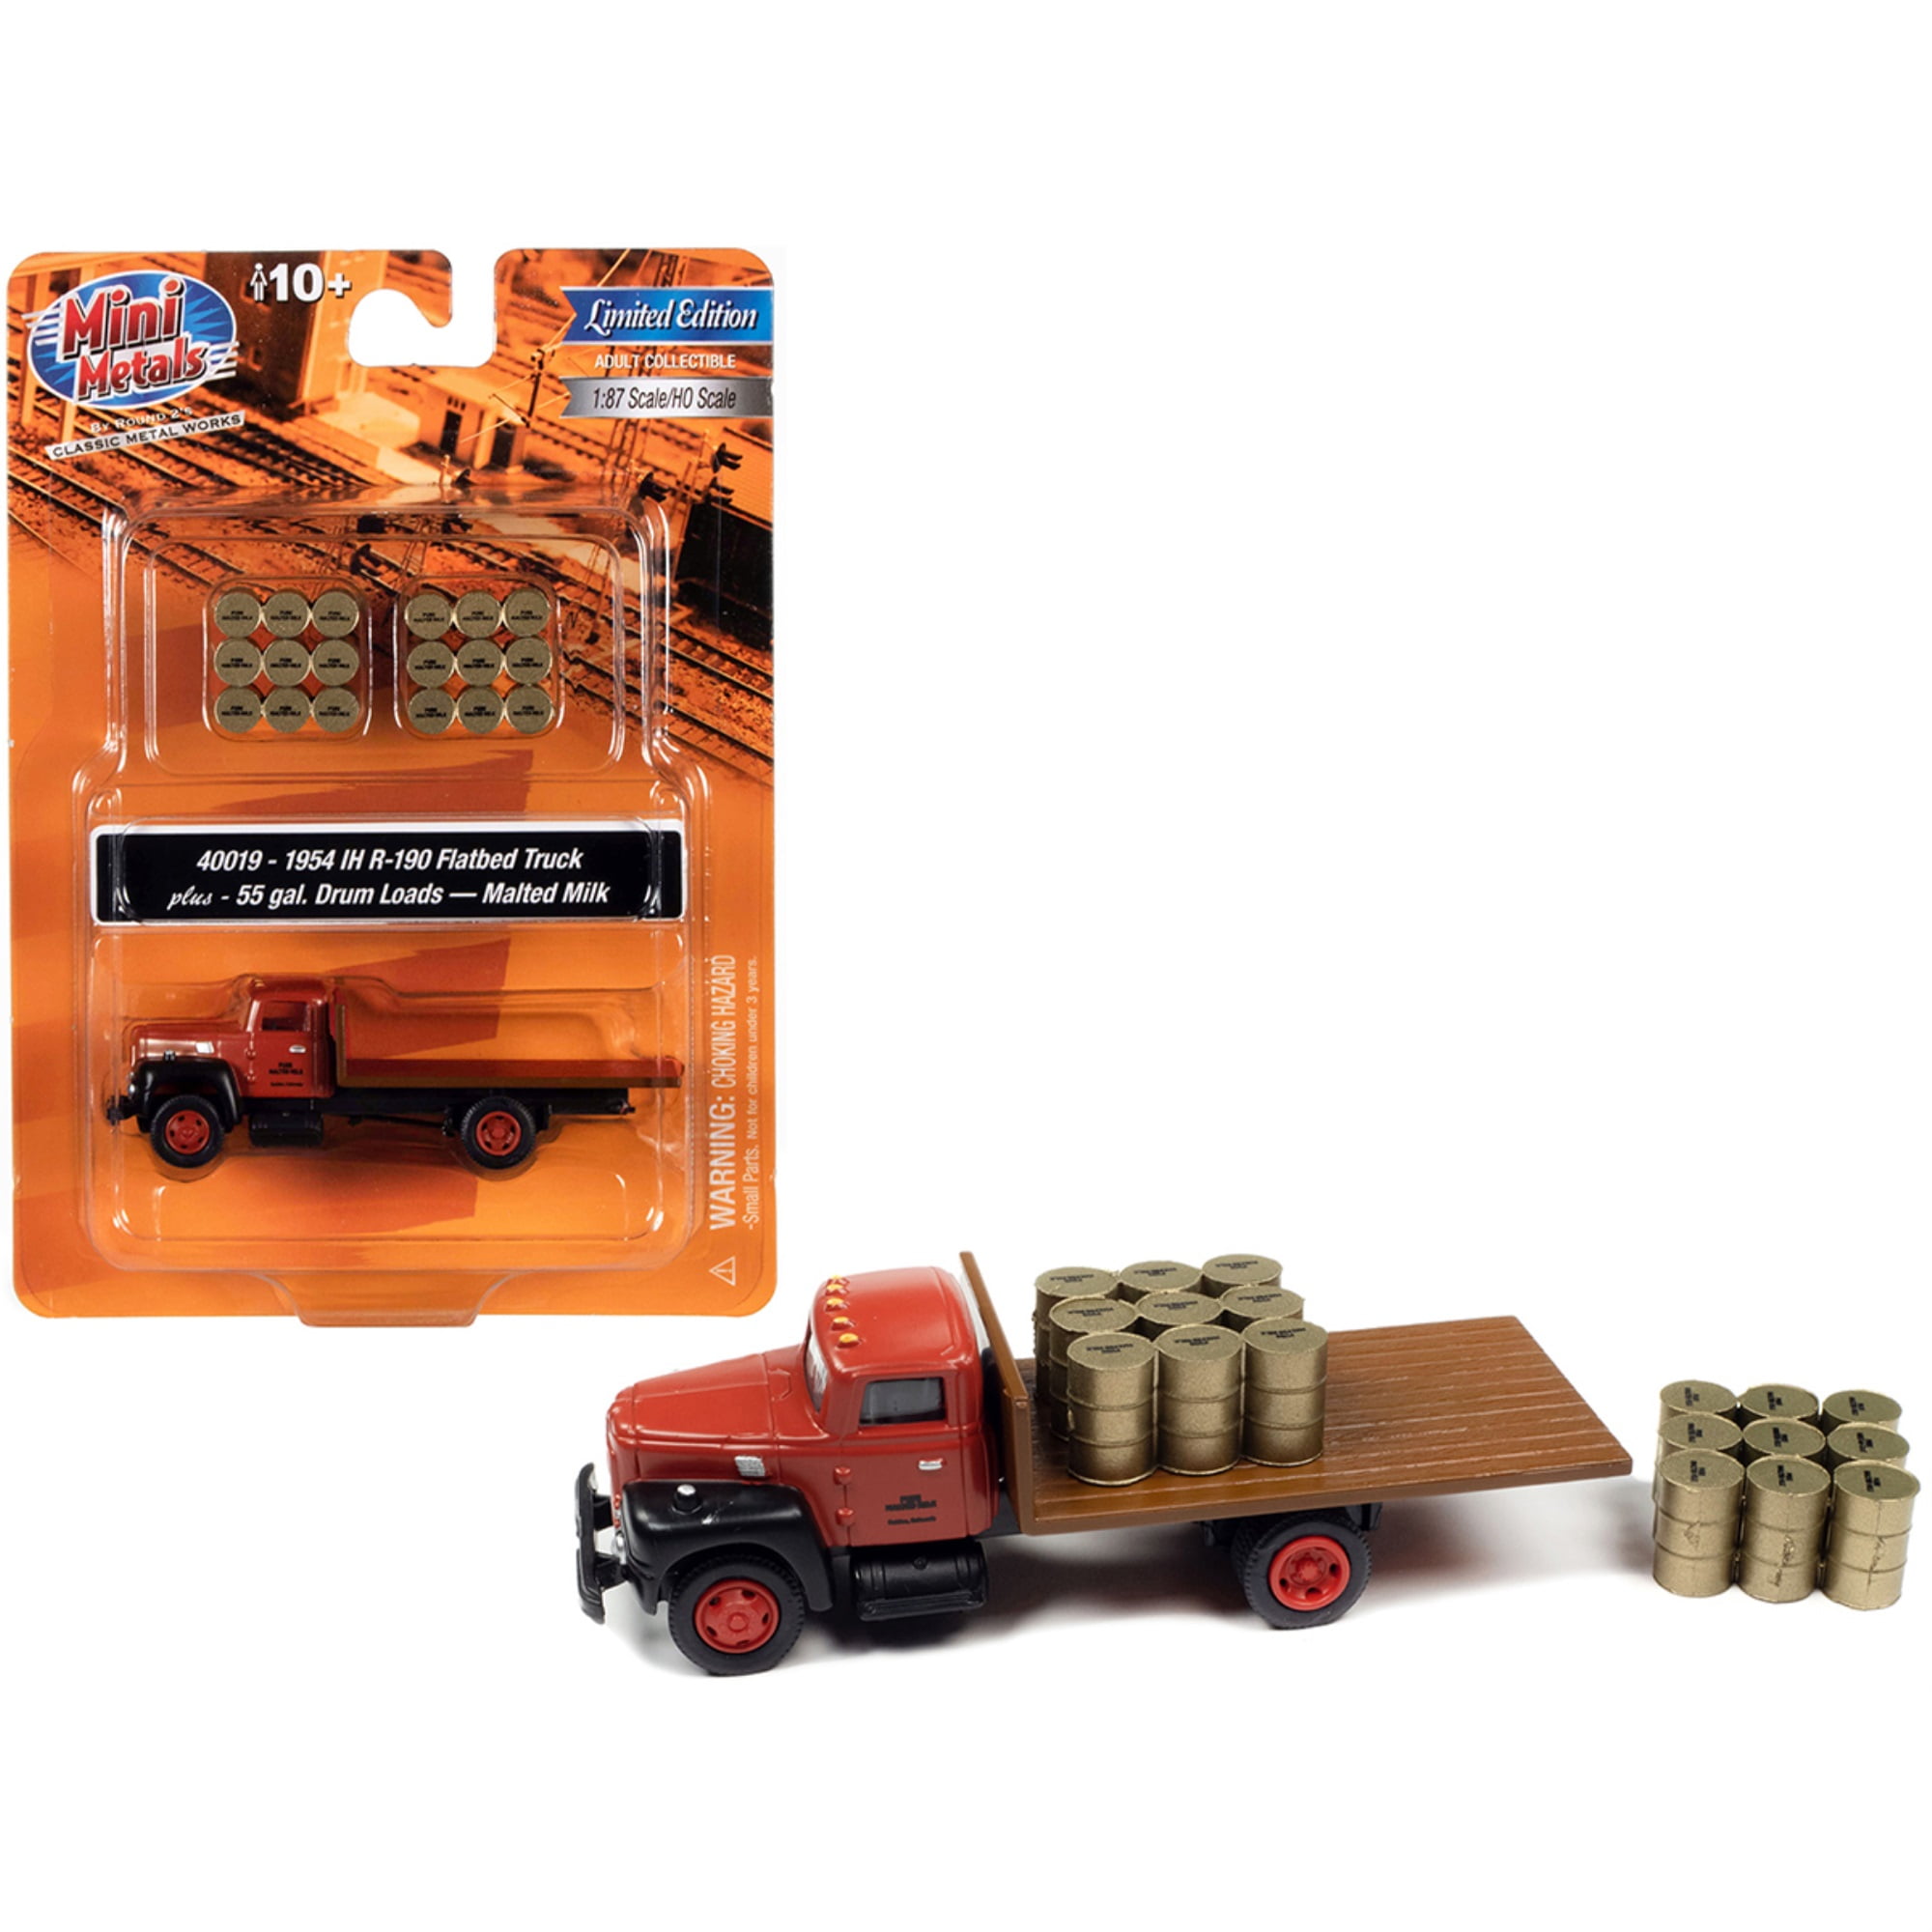 40019 3.375 in. 1-87 Scale 1954 Ih R 190 Flatbed Two 55 gal Drum Loads Pure Malted Milk Model Truck, Brown -  Classic Metal Works